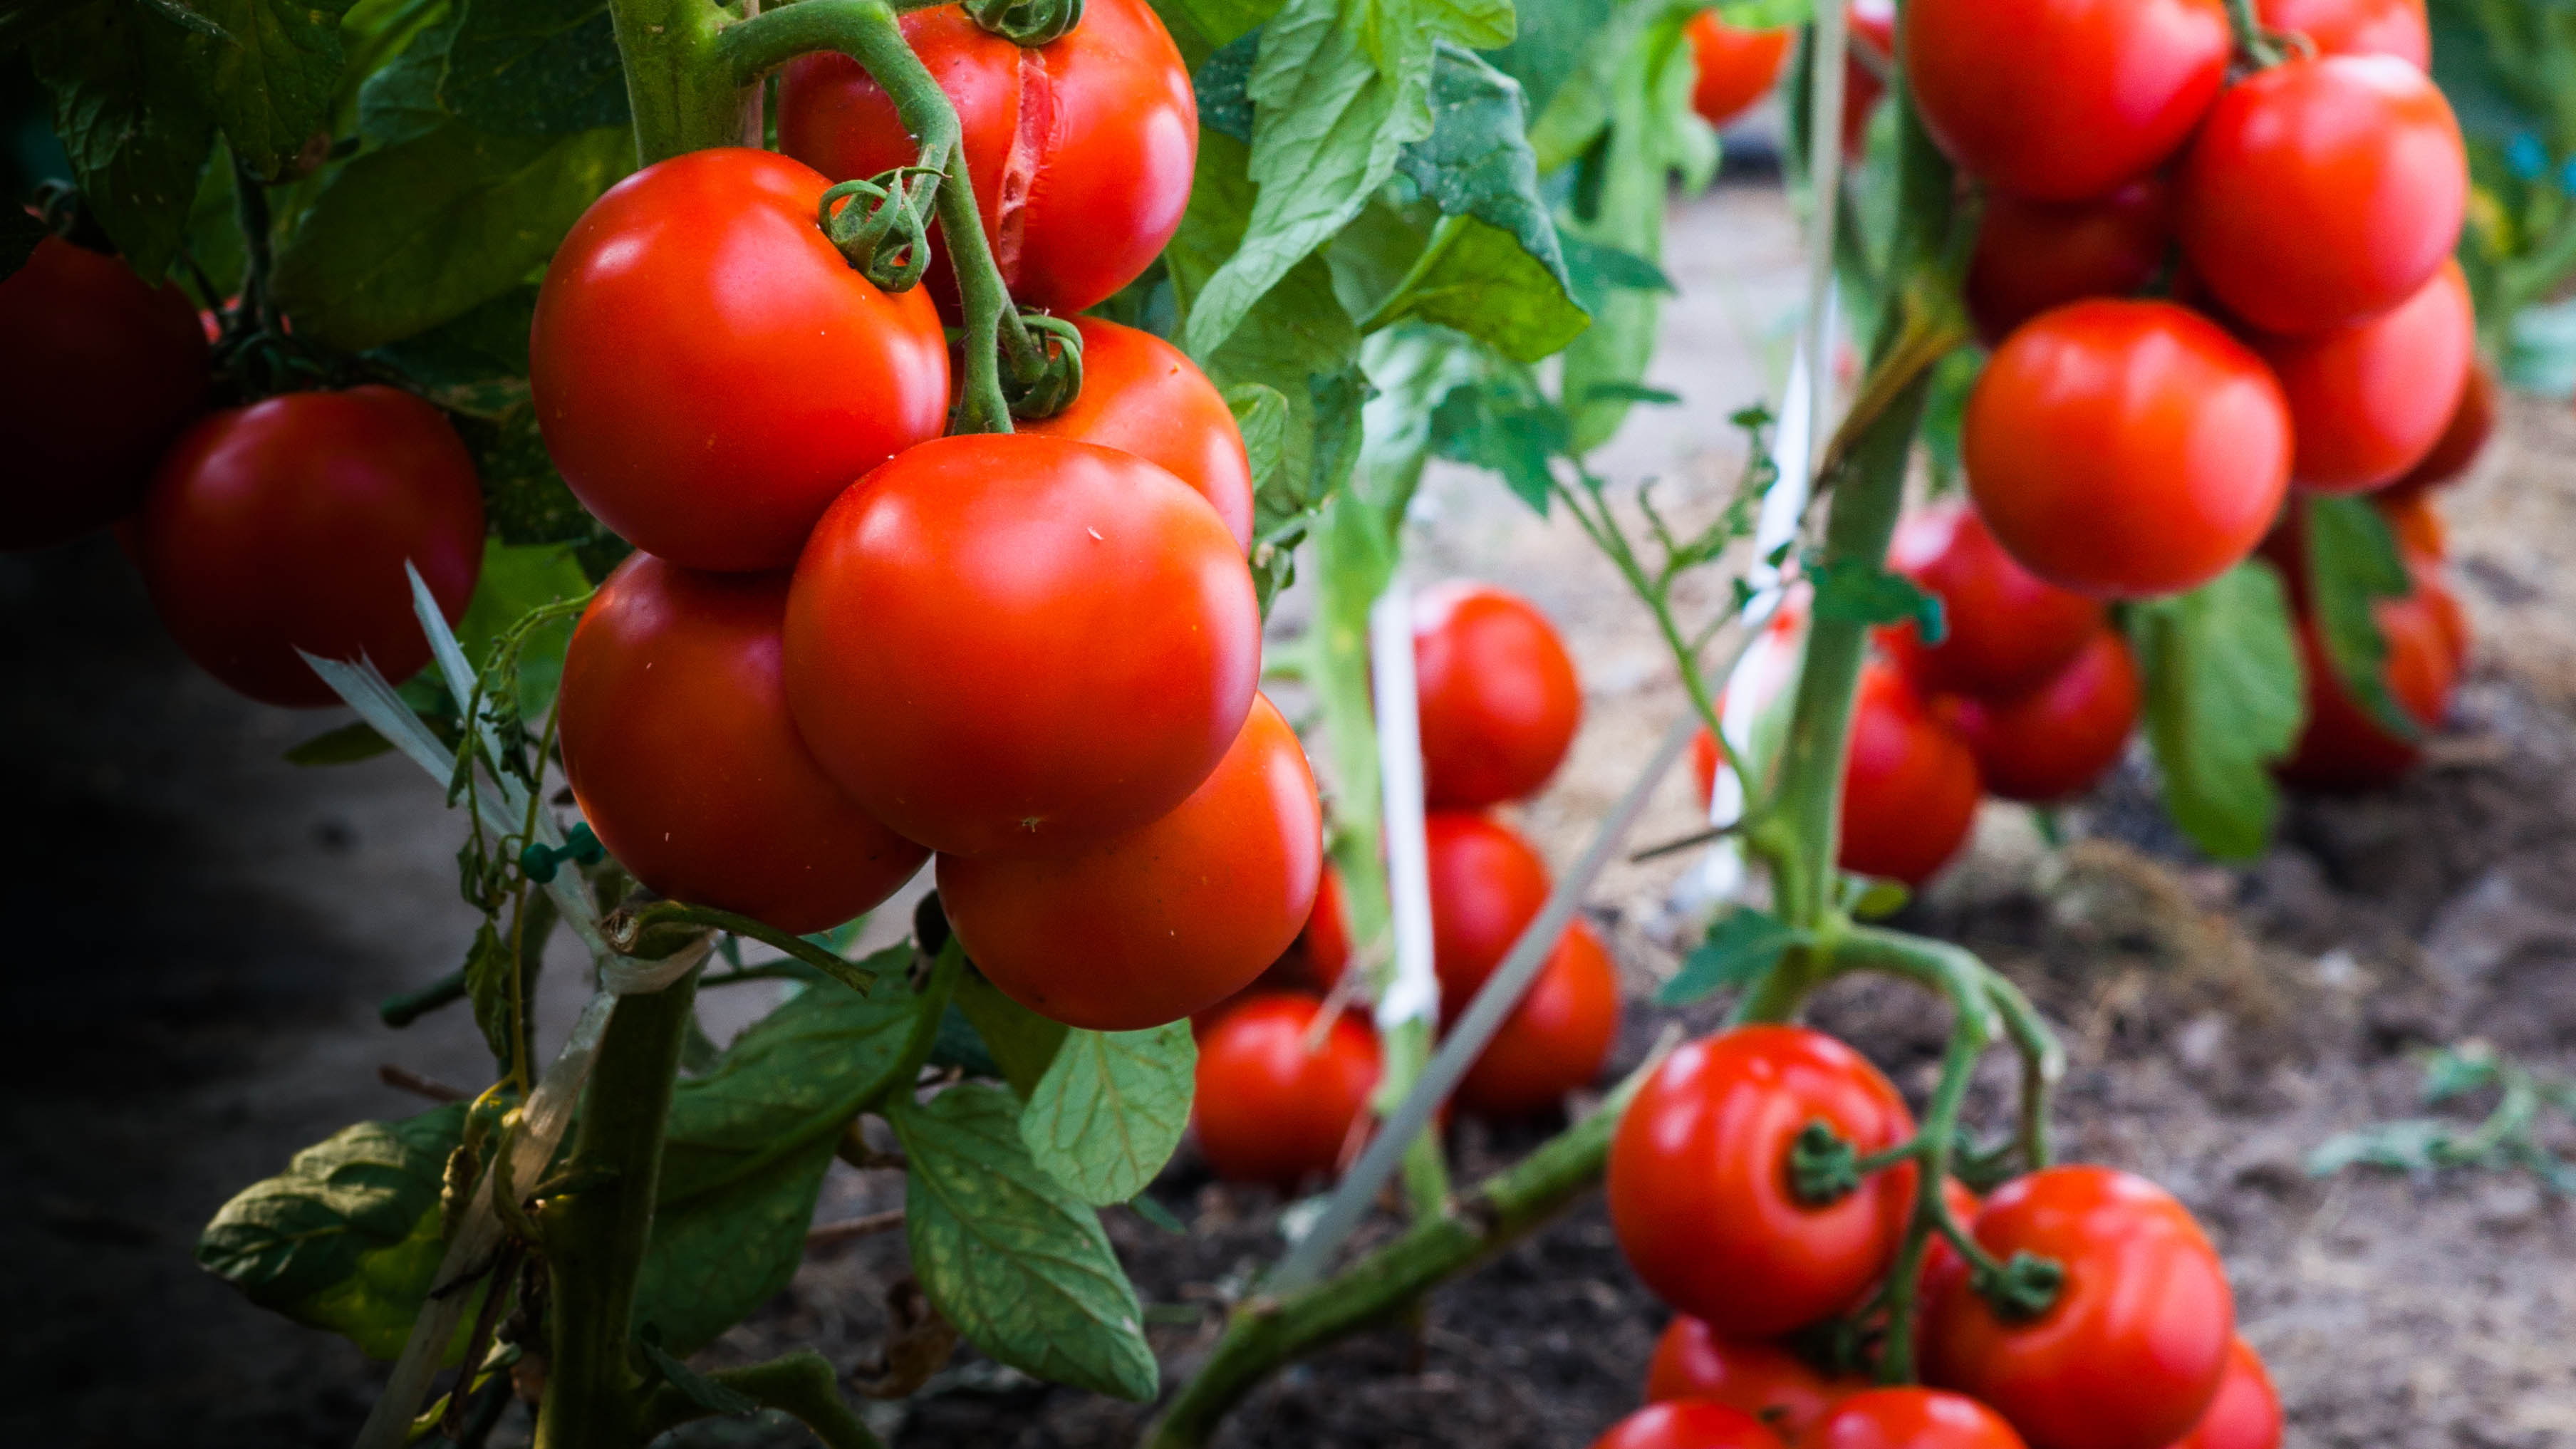 7 ways to get more fruit from a tomato plant | Tom's Guide